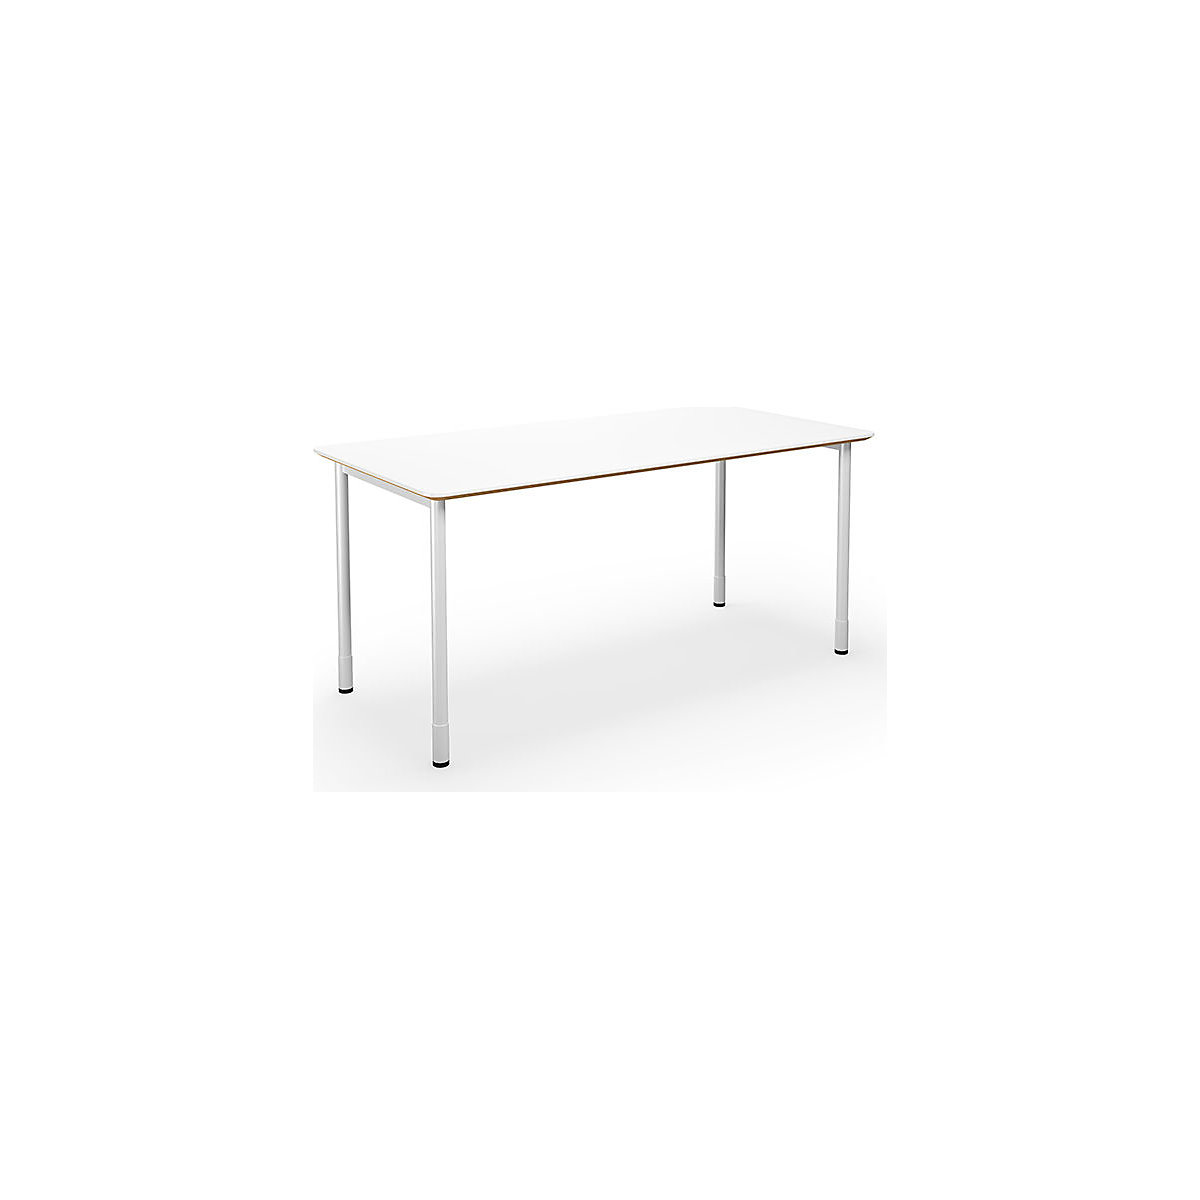 DUO-C Trend multi-purpose desk, straight tabletop, rounded corners, WxD 1600 x 800 mm, white, white-2